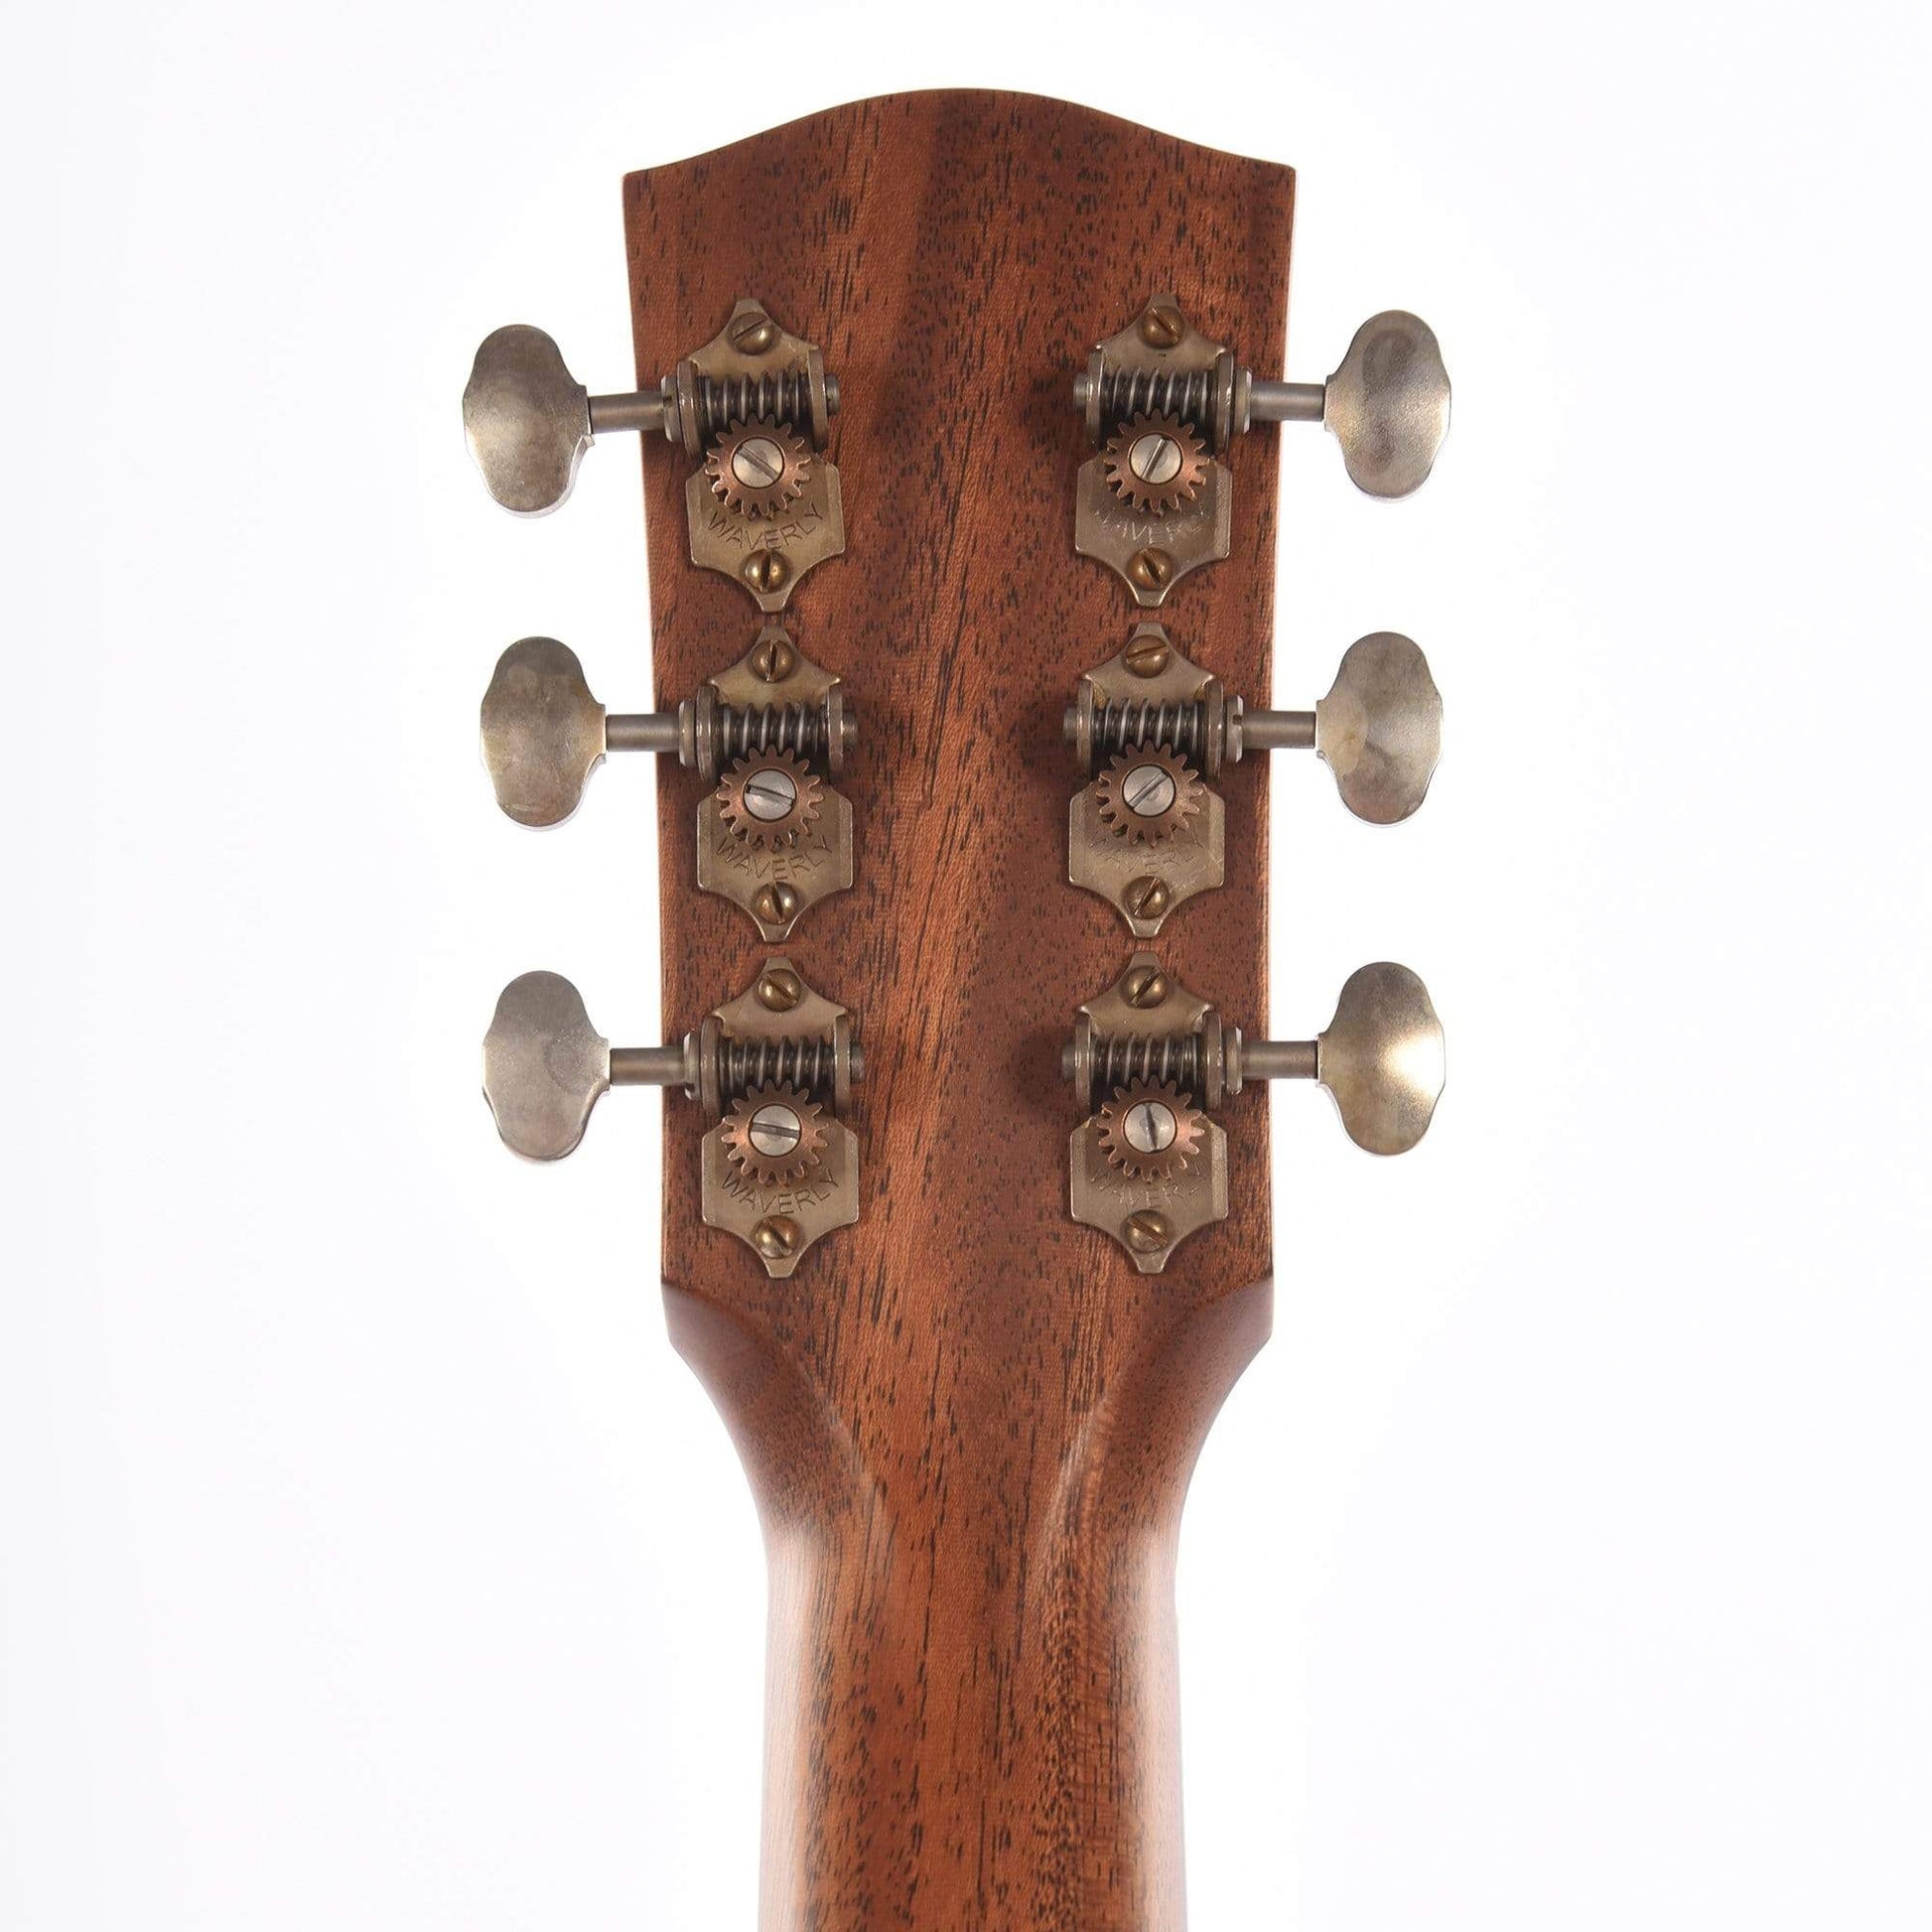 Bedell Coffee House Parlor Adirondack Spruce/Rosewood Espresso Burst w/K&K Pure Mini Acoustic Guitars / Parlor